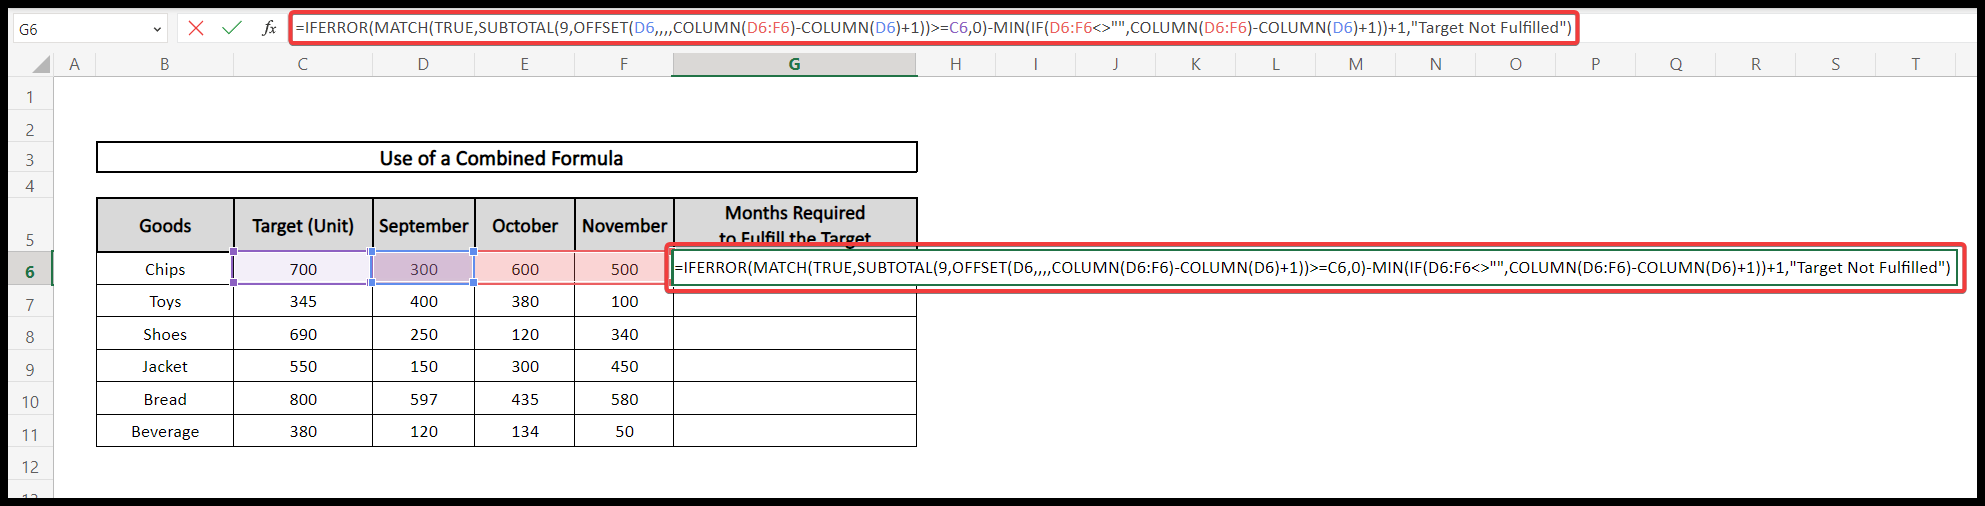  excel count columns until value reached using combination of IFERROR, MATCH, SUBTOTAL, OFFSET, COLUMN, MIN functions